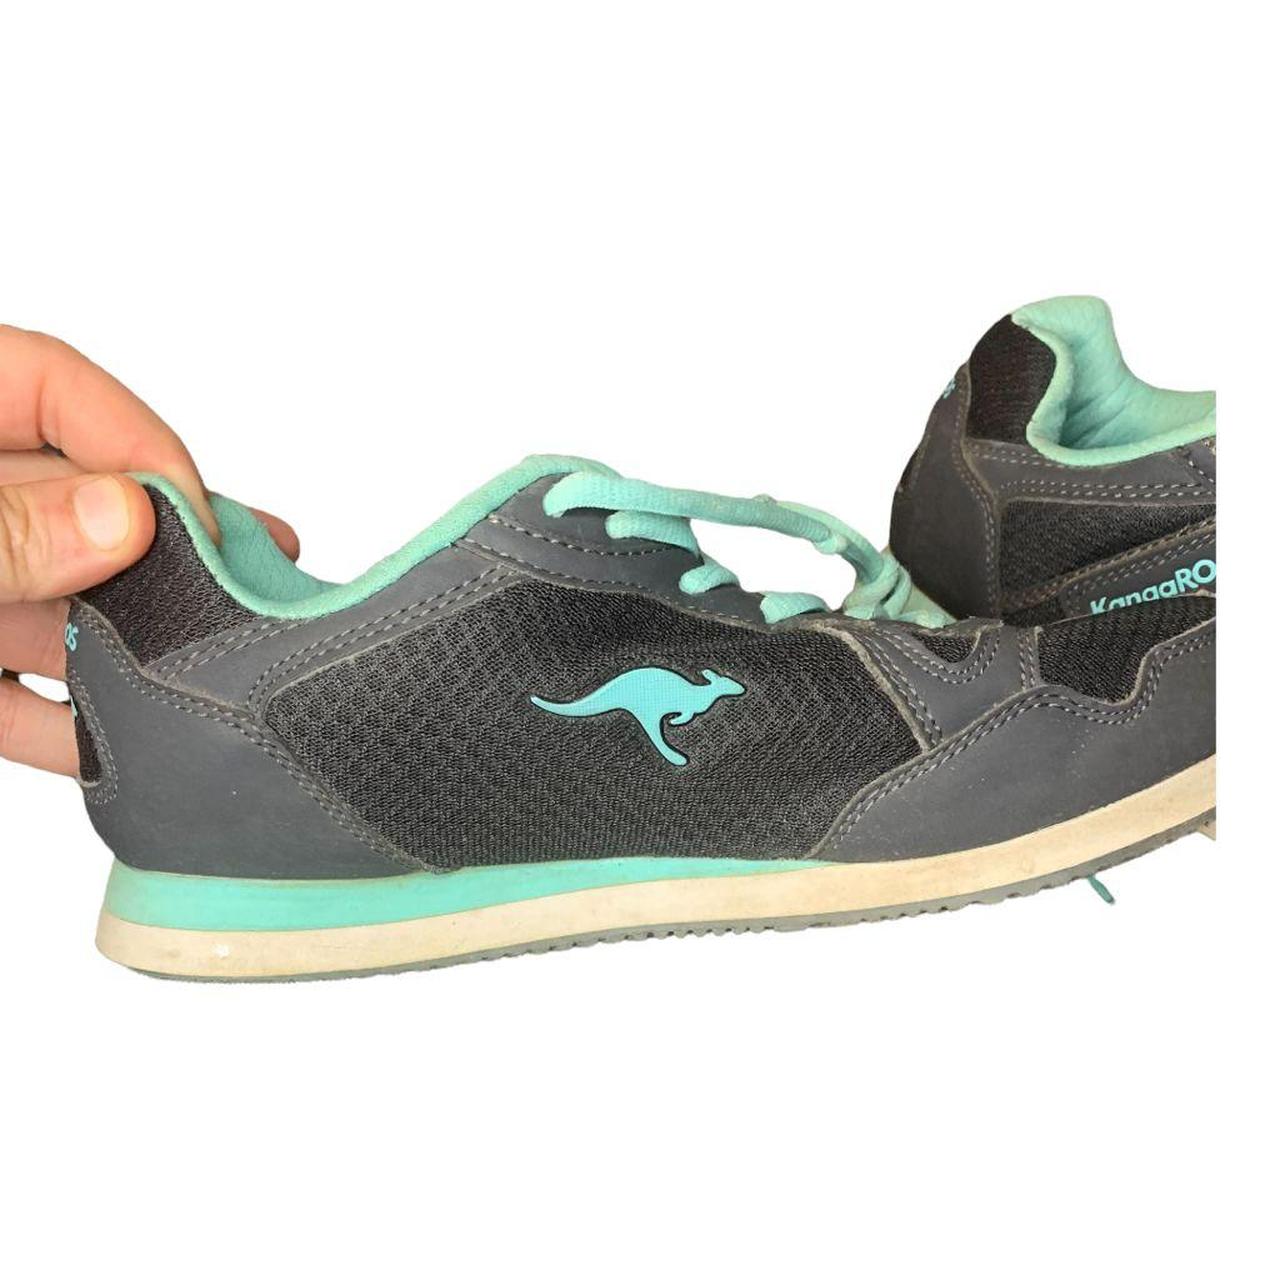 KangaROOS Women's Grey and Blue Trainers (4)